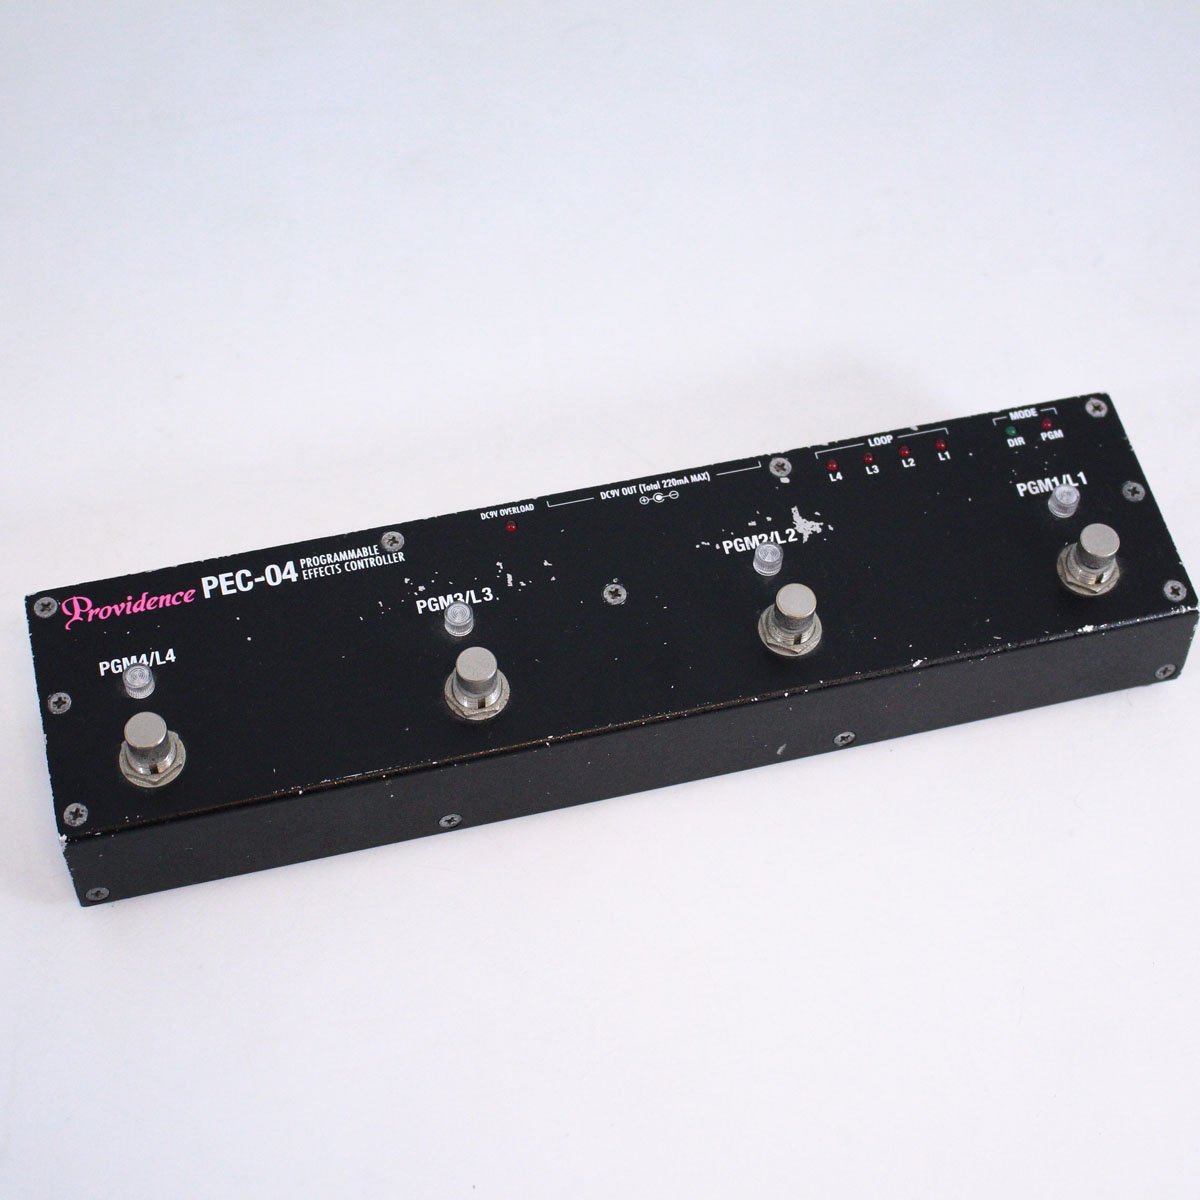 Providence PEC-04 / Programmable Effects Controller 【渋谷店